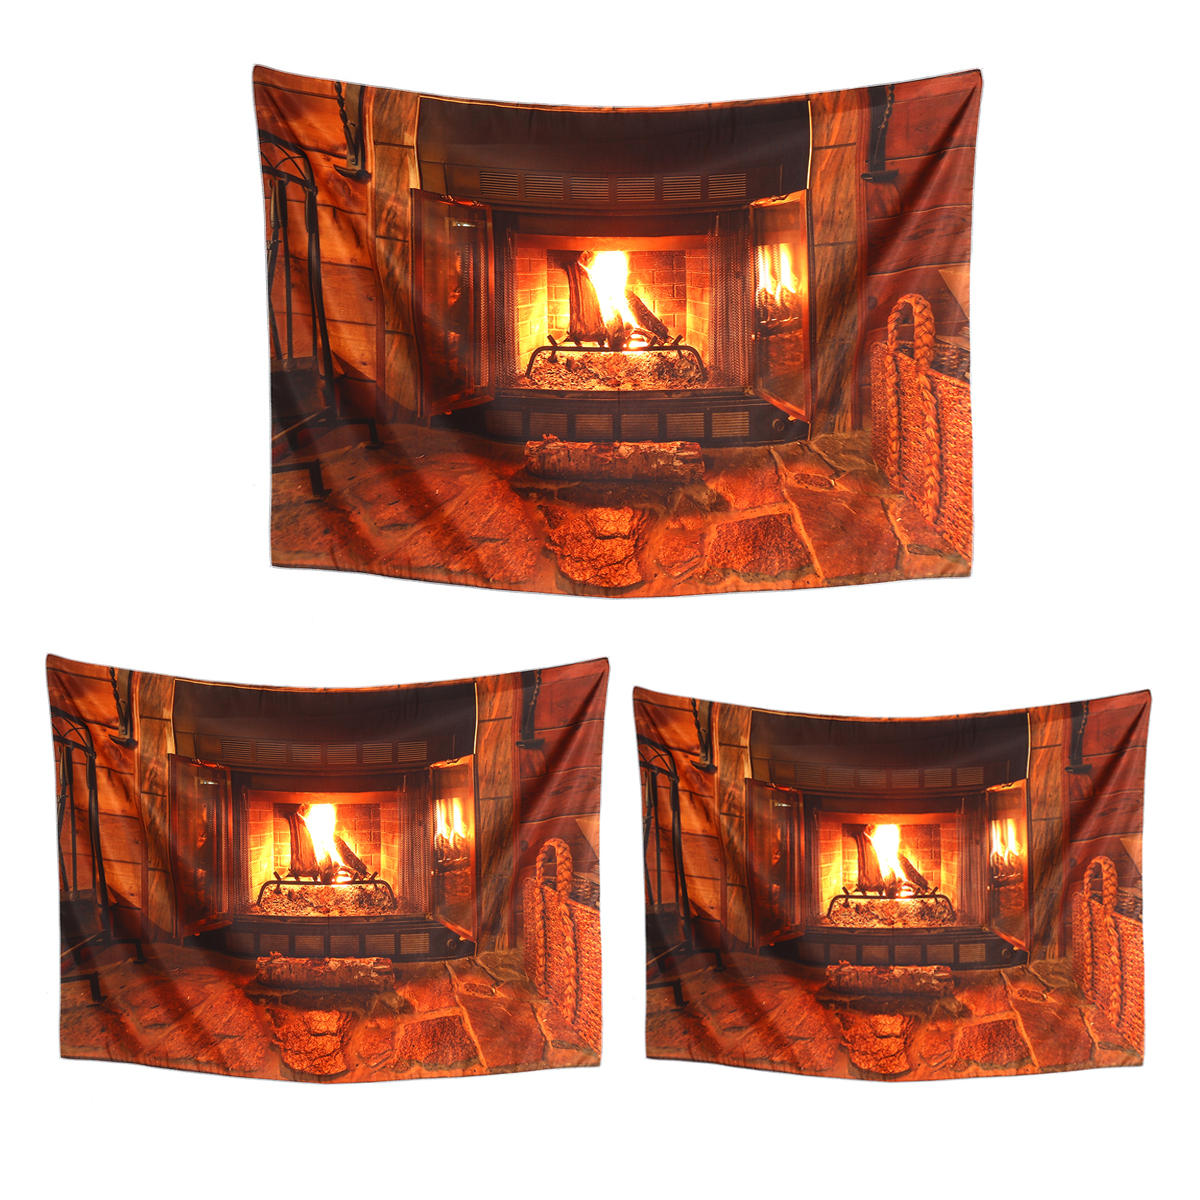 Polyester Wall Hanging Tapestry Art Home Decor Fireplace Pattern Blankets For Home Bedroom Porch Han